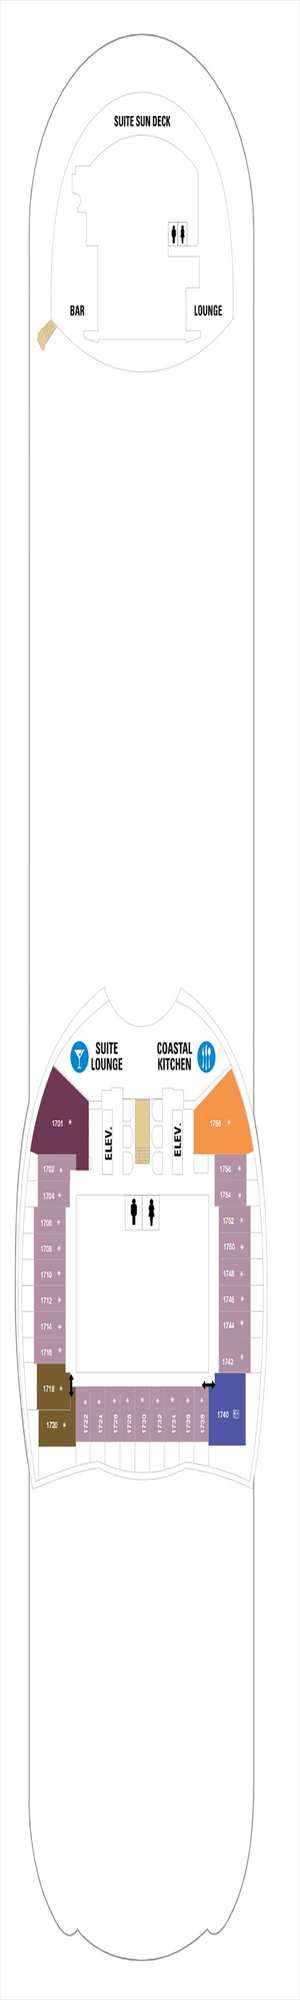 Deck plan for Oasis of the Seas